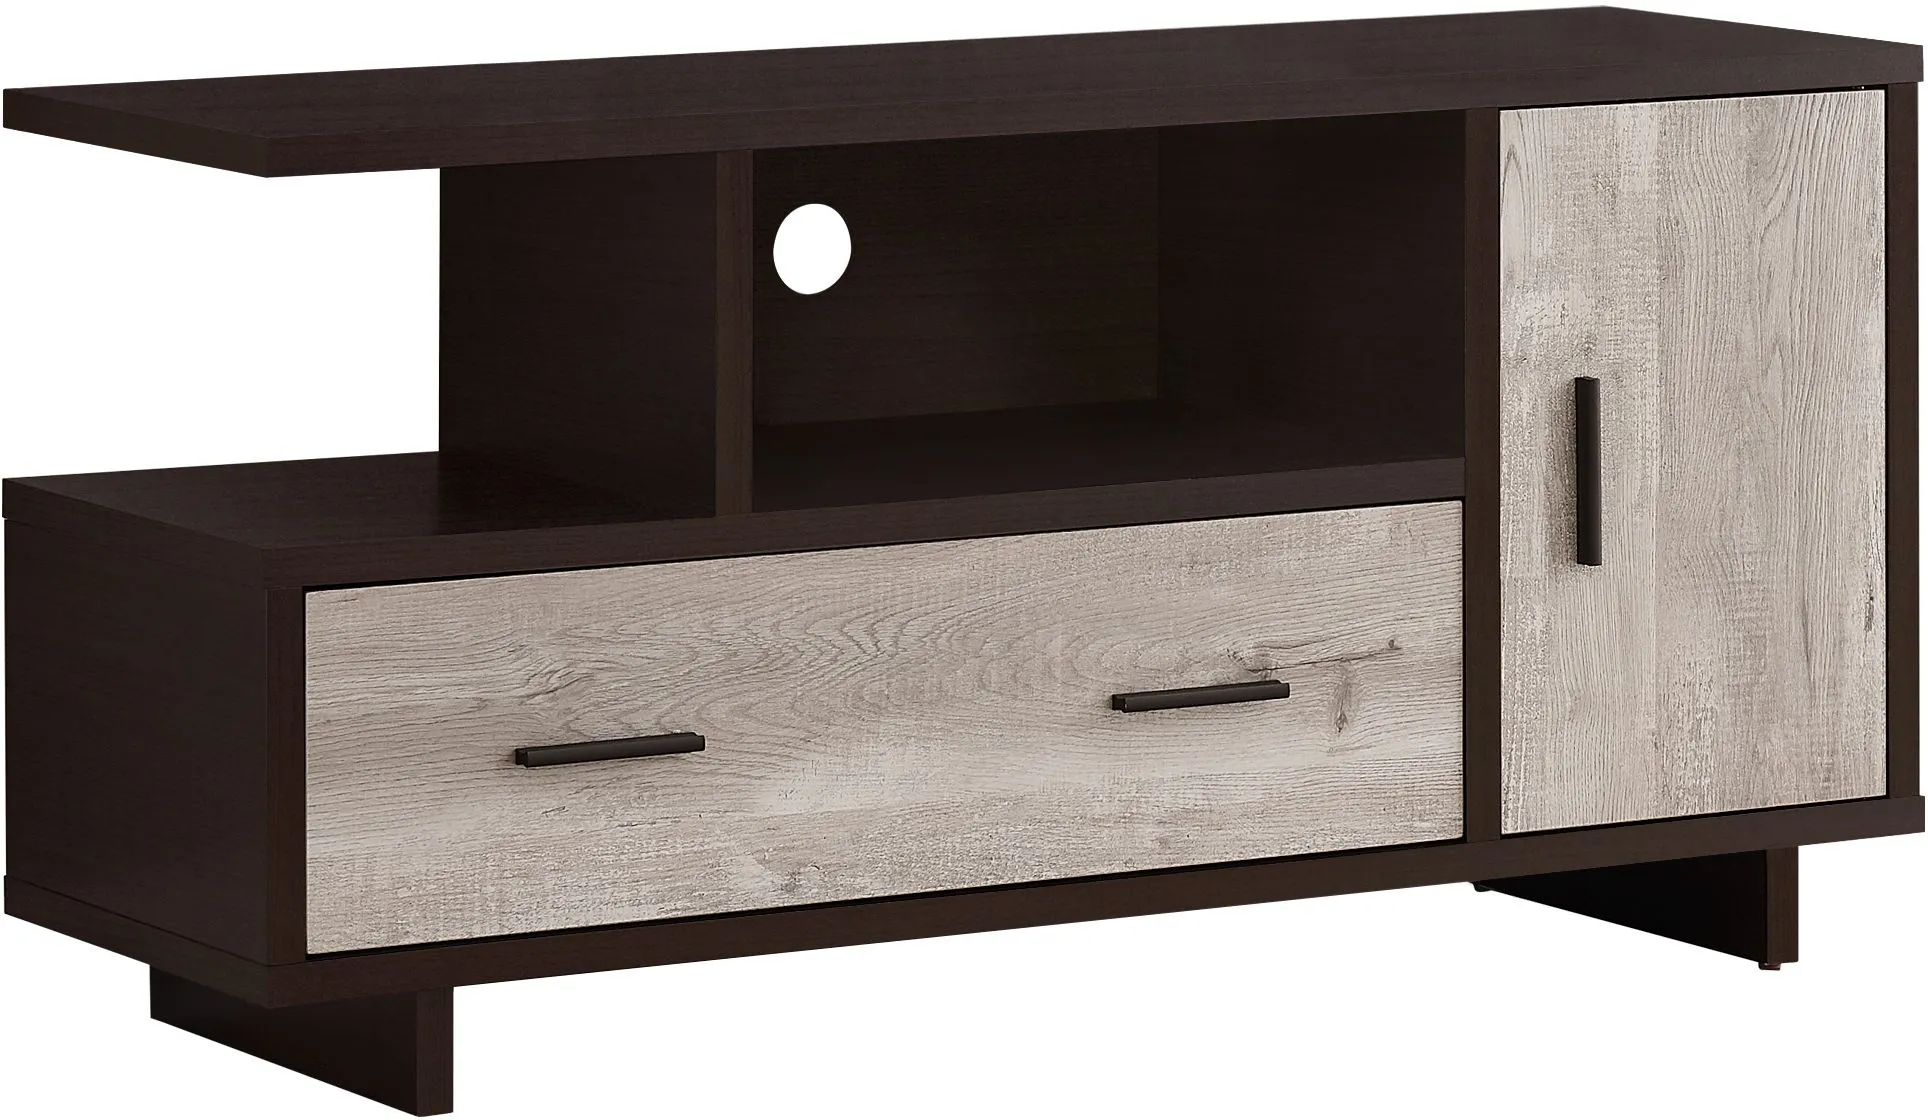 Tv Stand, 48 Inch, Console, Media Entertainment Center, Storage Cabinet, Drawers, Living Room, Bedroom, Laminate, Brown, Contemporary, Modern